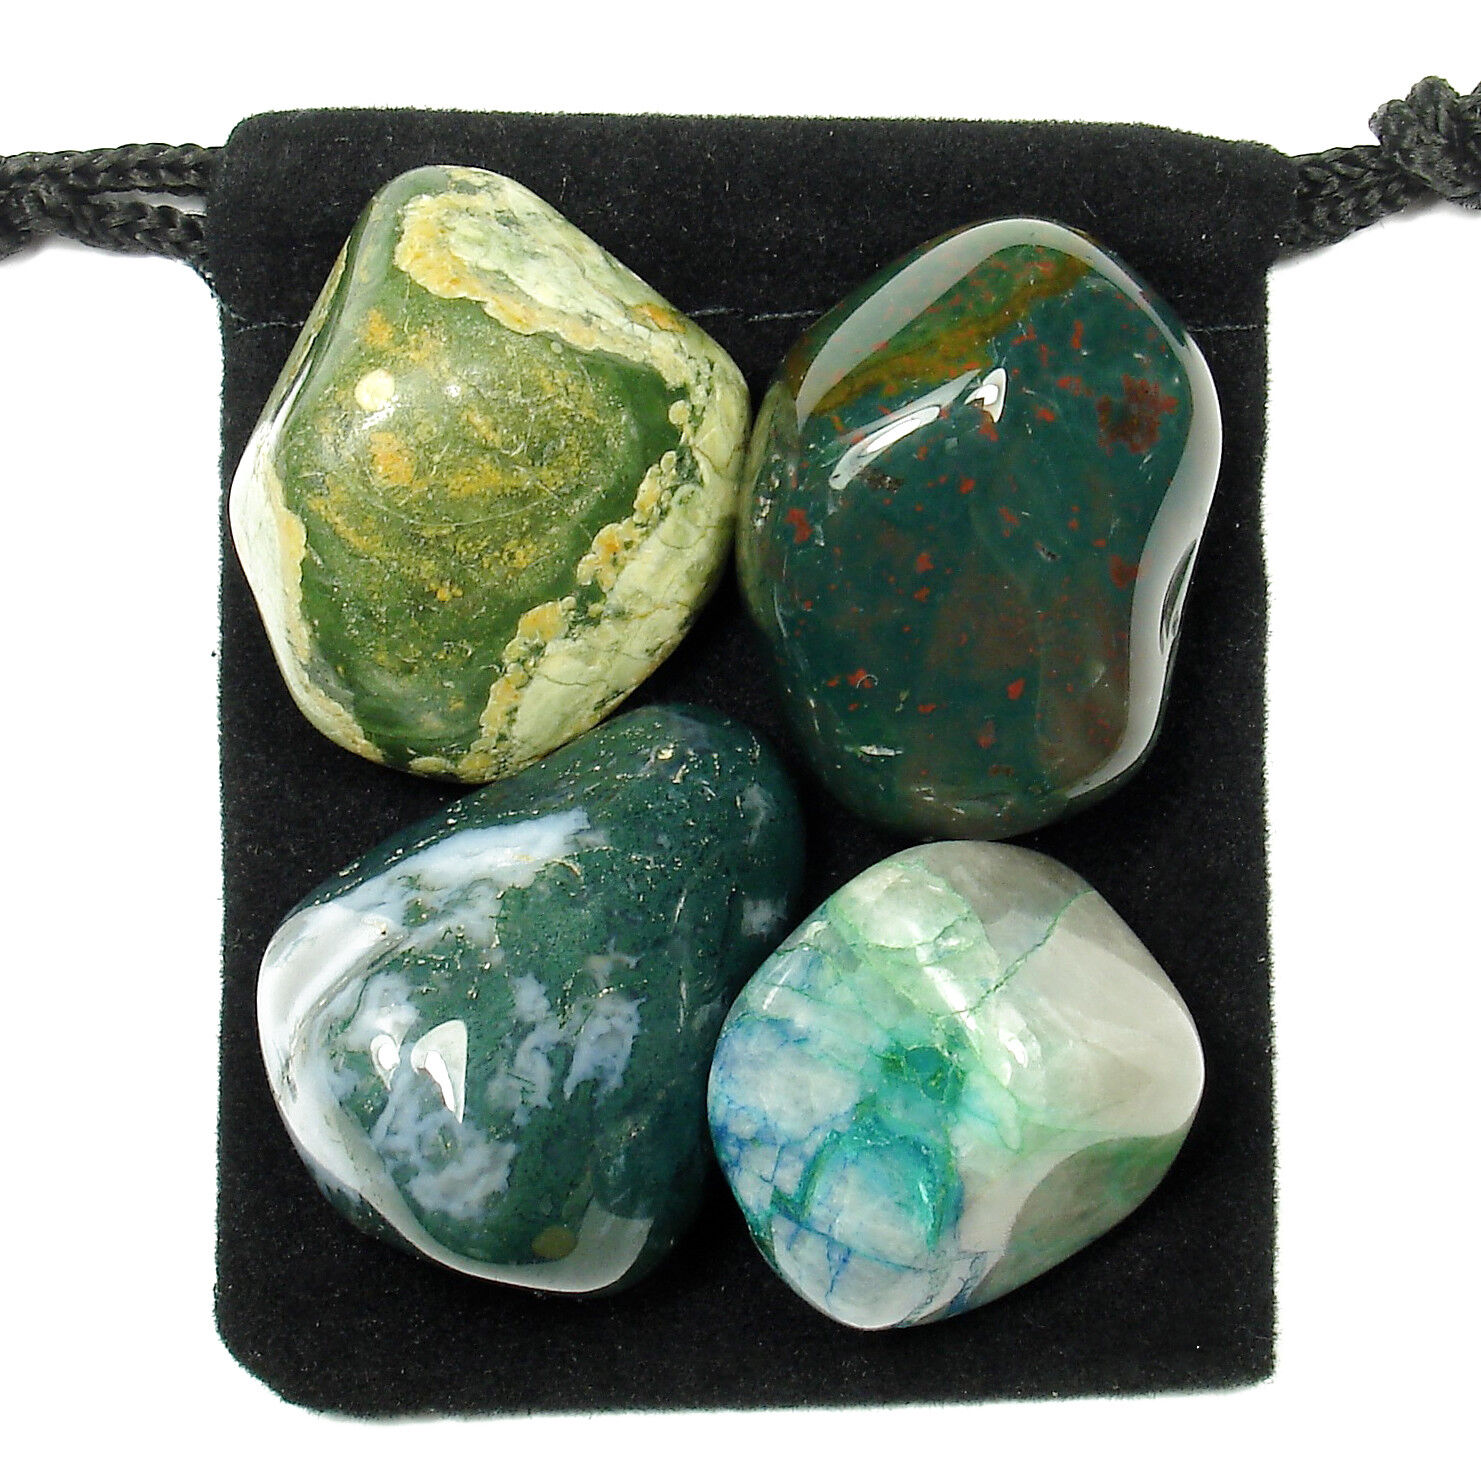 INFECTION FIGHTER Tumbled Crystal Healing Set = 4 Stones + Pouch + Card